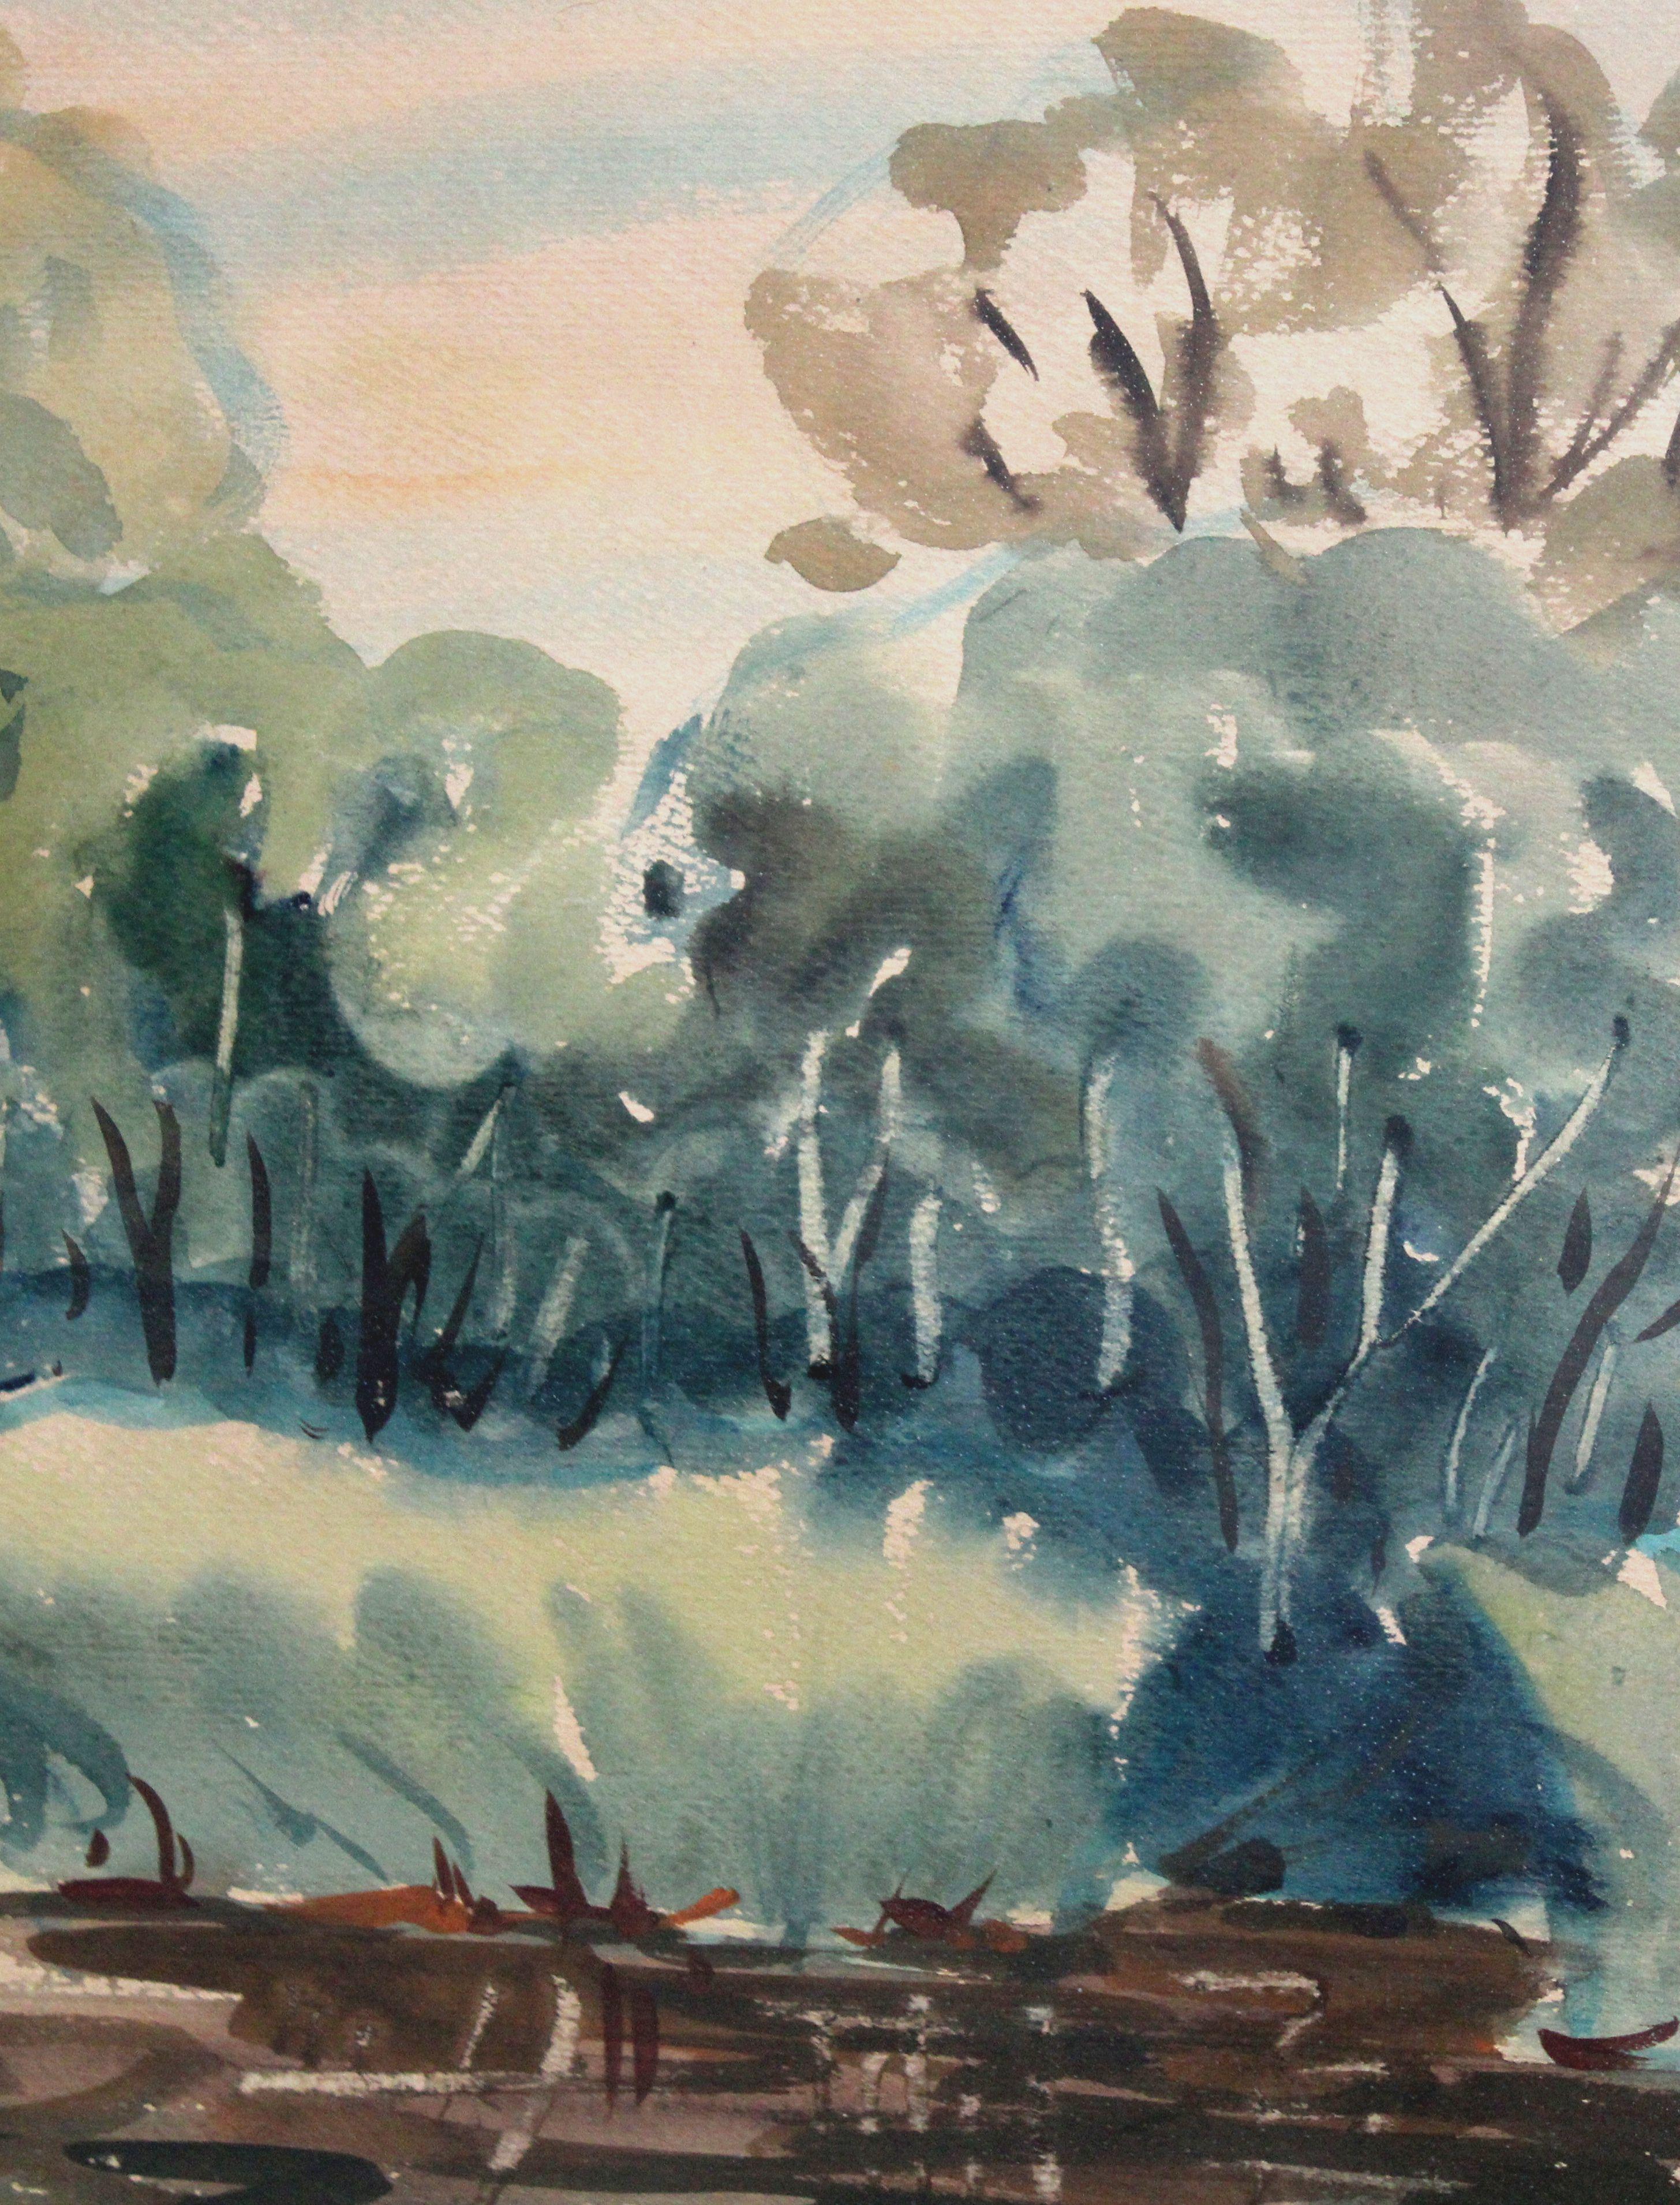 River. 1960, watercolor on paper, 43x61 cm - Realist Painting by Janis Brekte